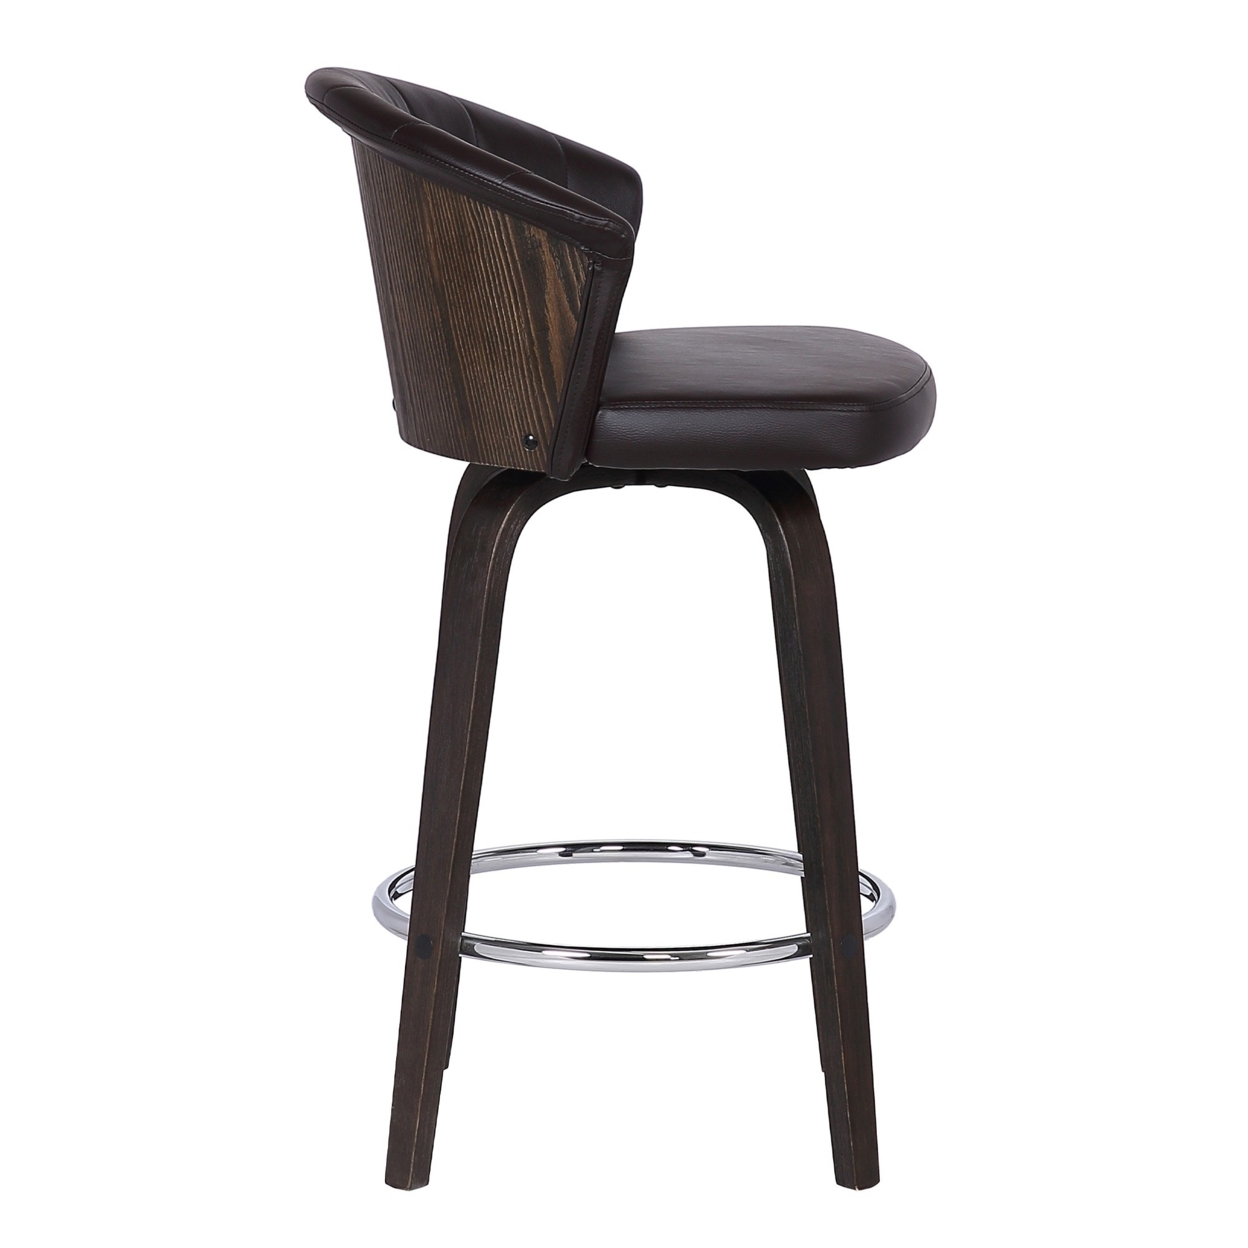 30 Channel Stitched Faux Leather Barstool With Tapered Legs, Brown- Saltoro Sherpi